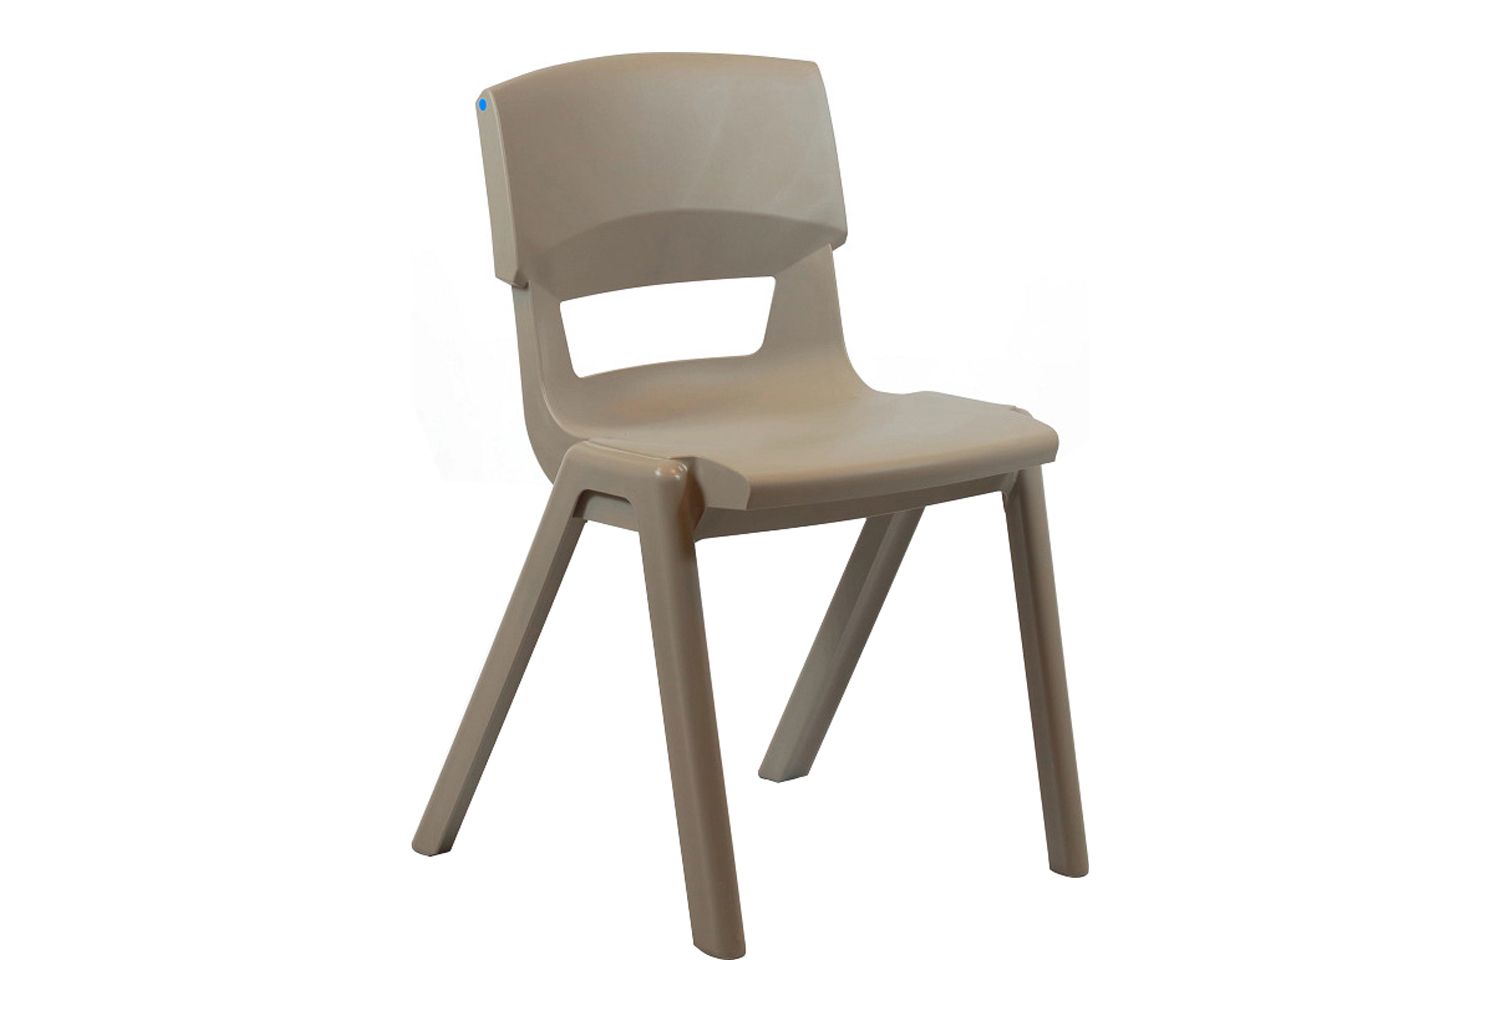 Postura+ Classroom Chair, 8-11 Years - 34wx31dx38h (cm), Misty Brown